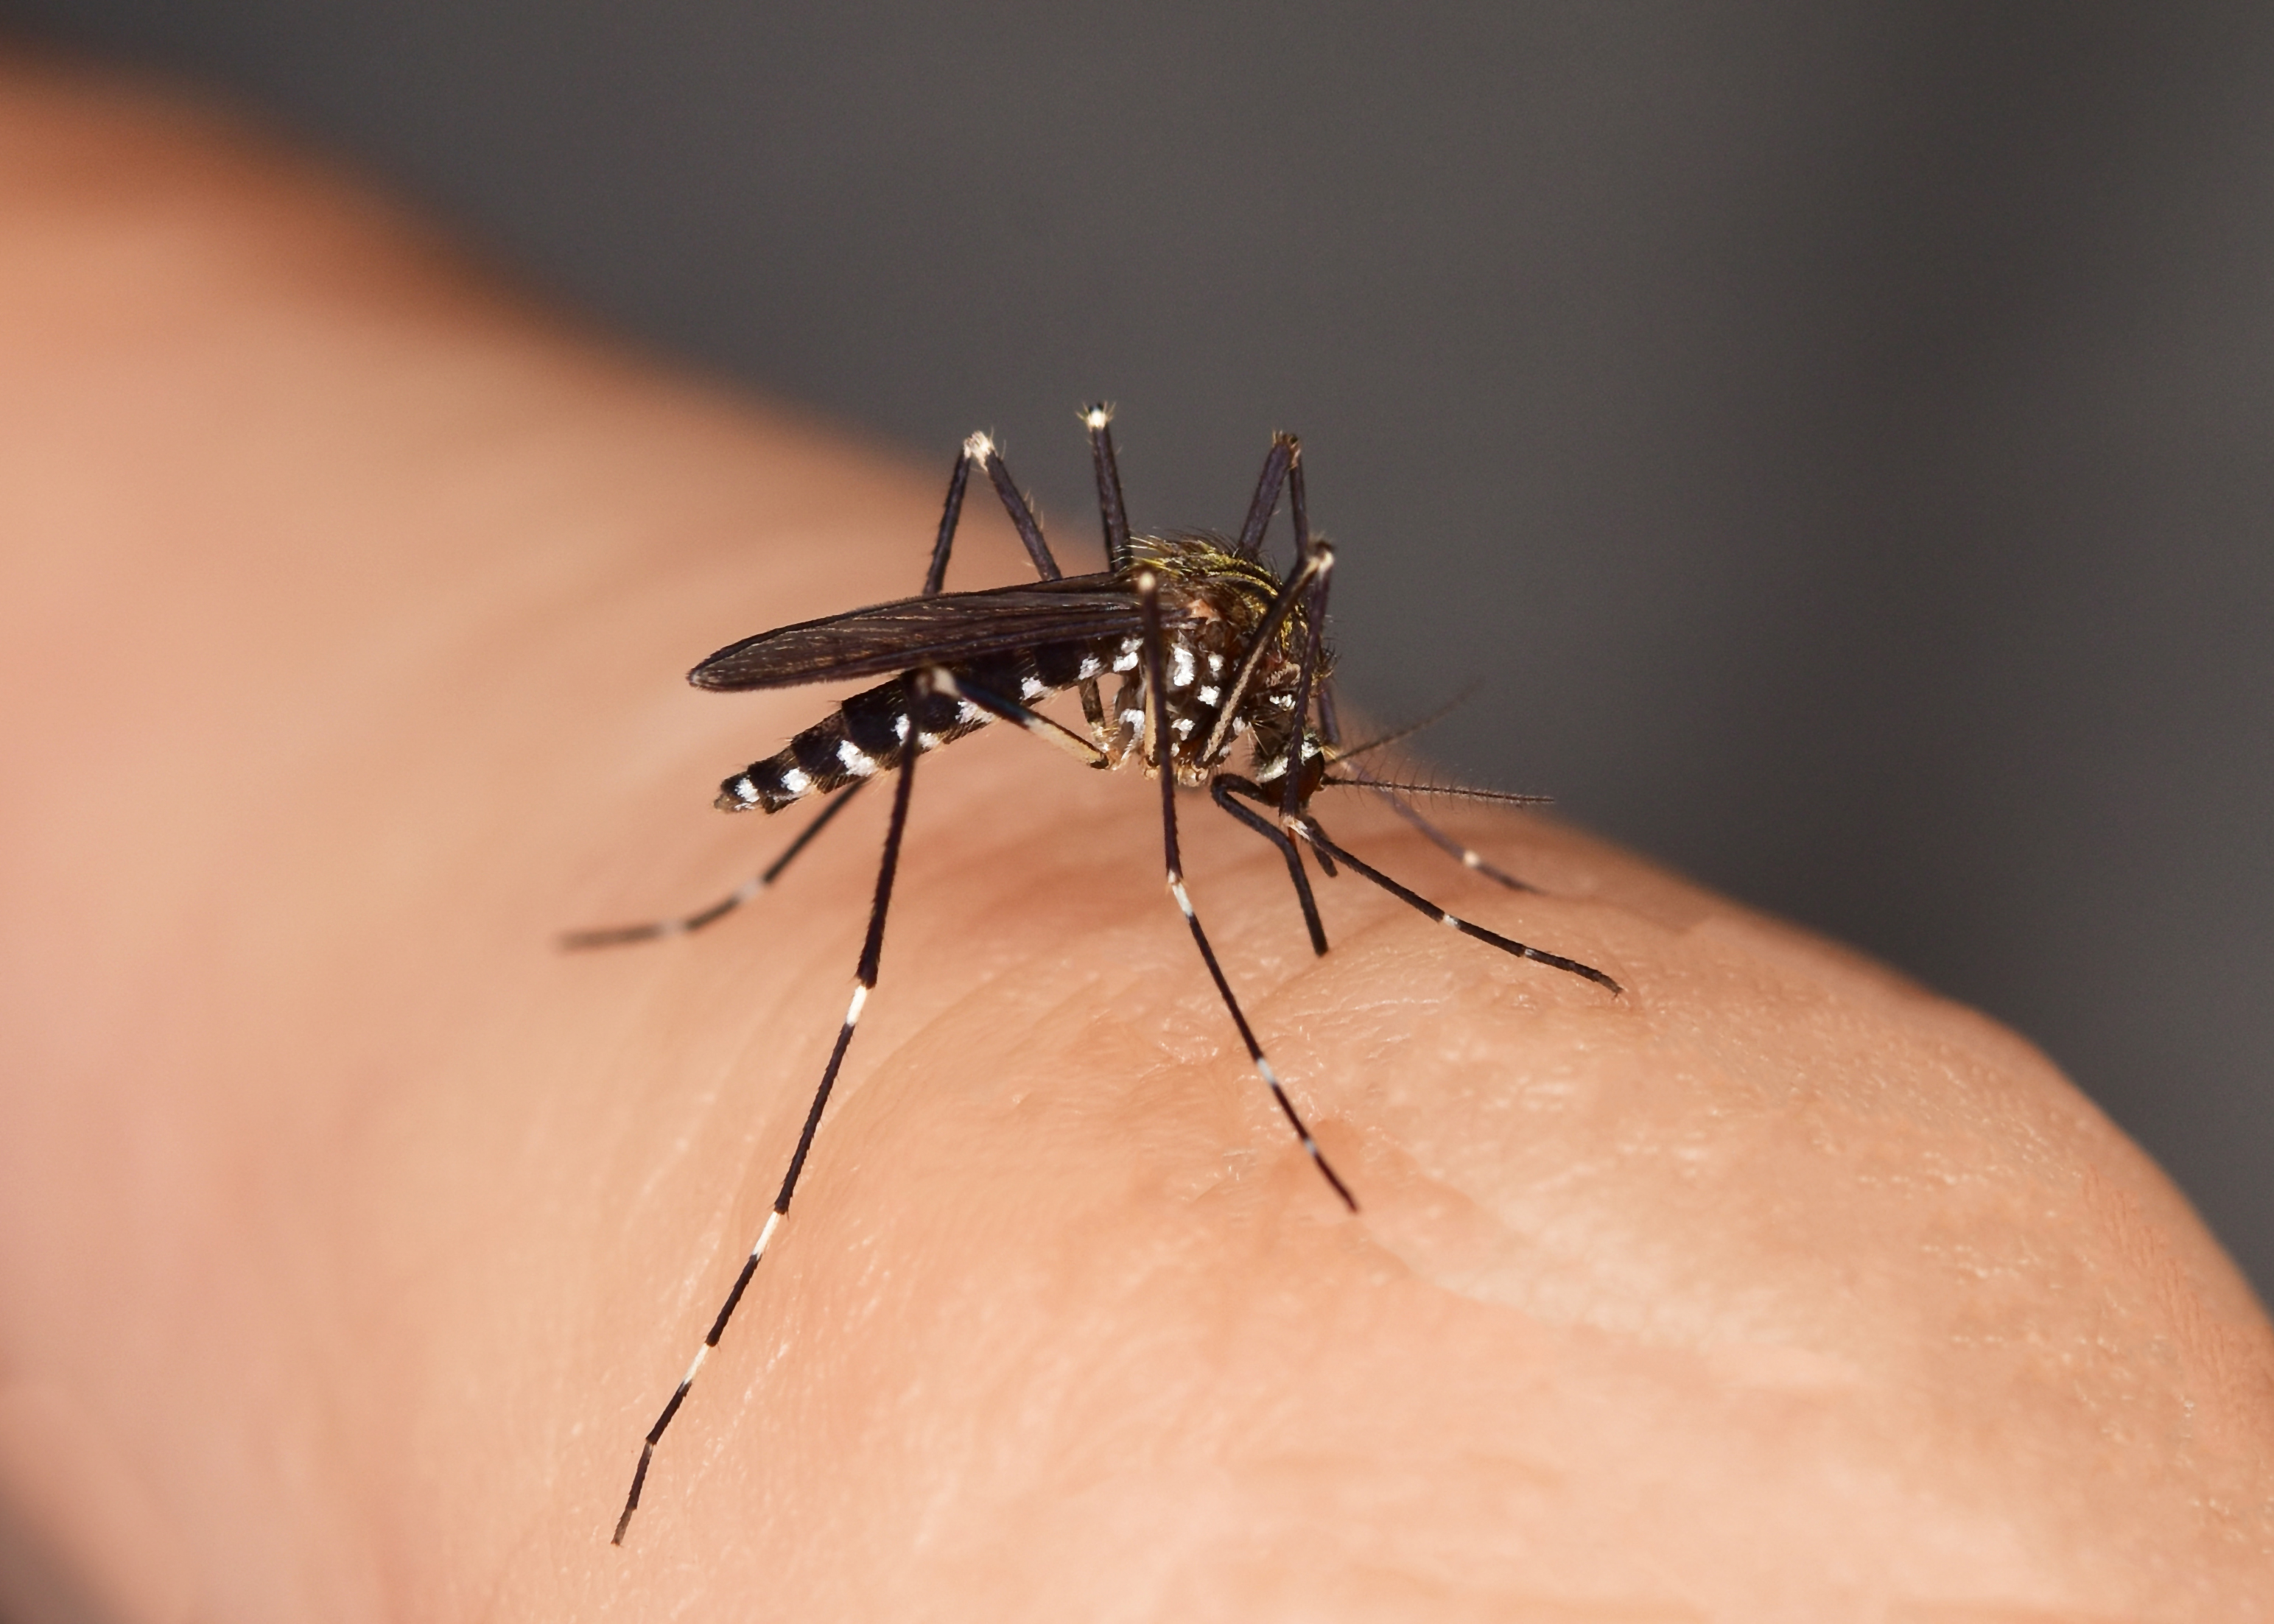 Mosquito sucking blood from a human. (Getty Images)